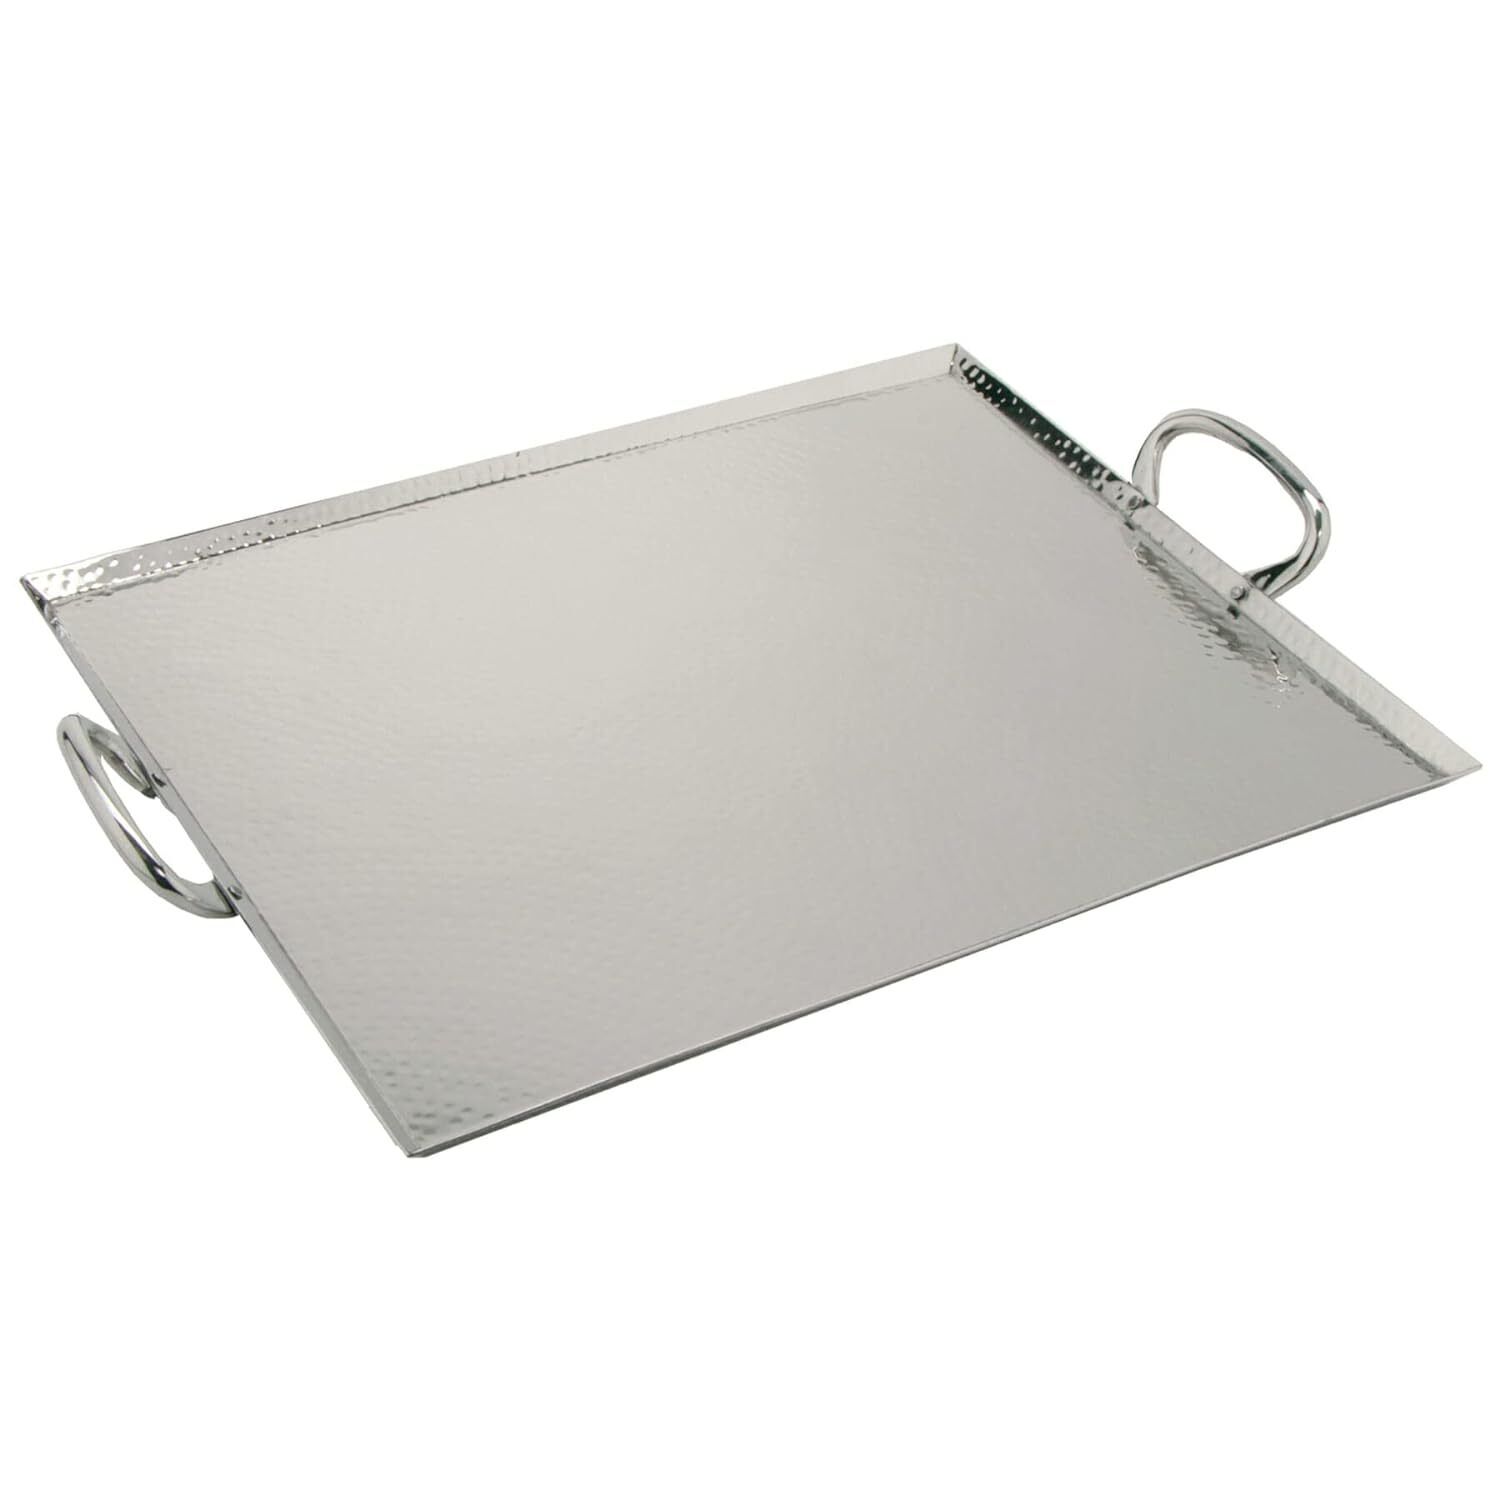 HEAVY-DUTY METAL SERVING/OTTOMAN TRAY WITH HANDLES, 19\